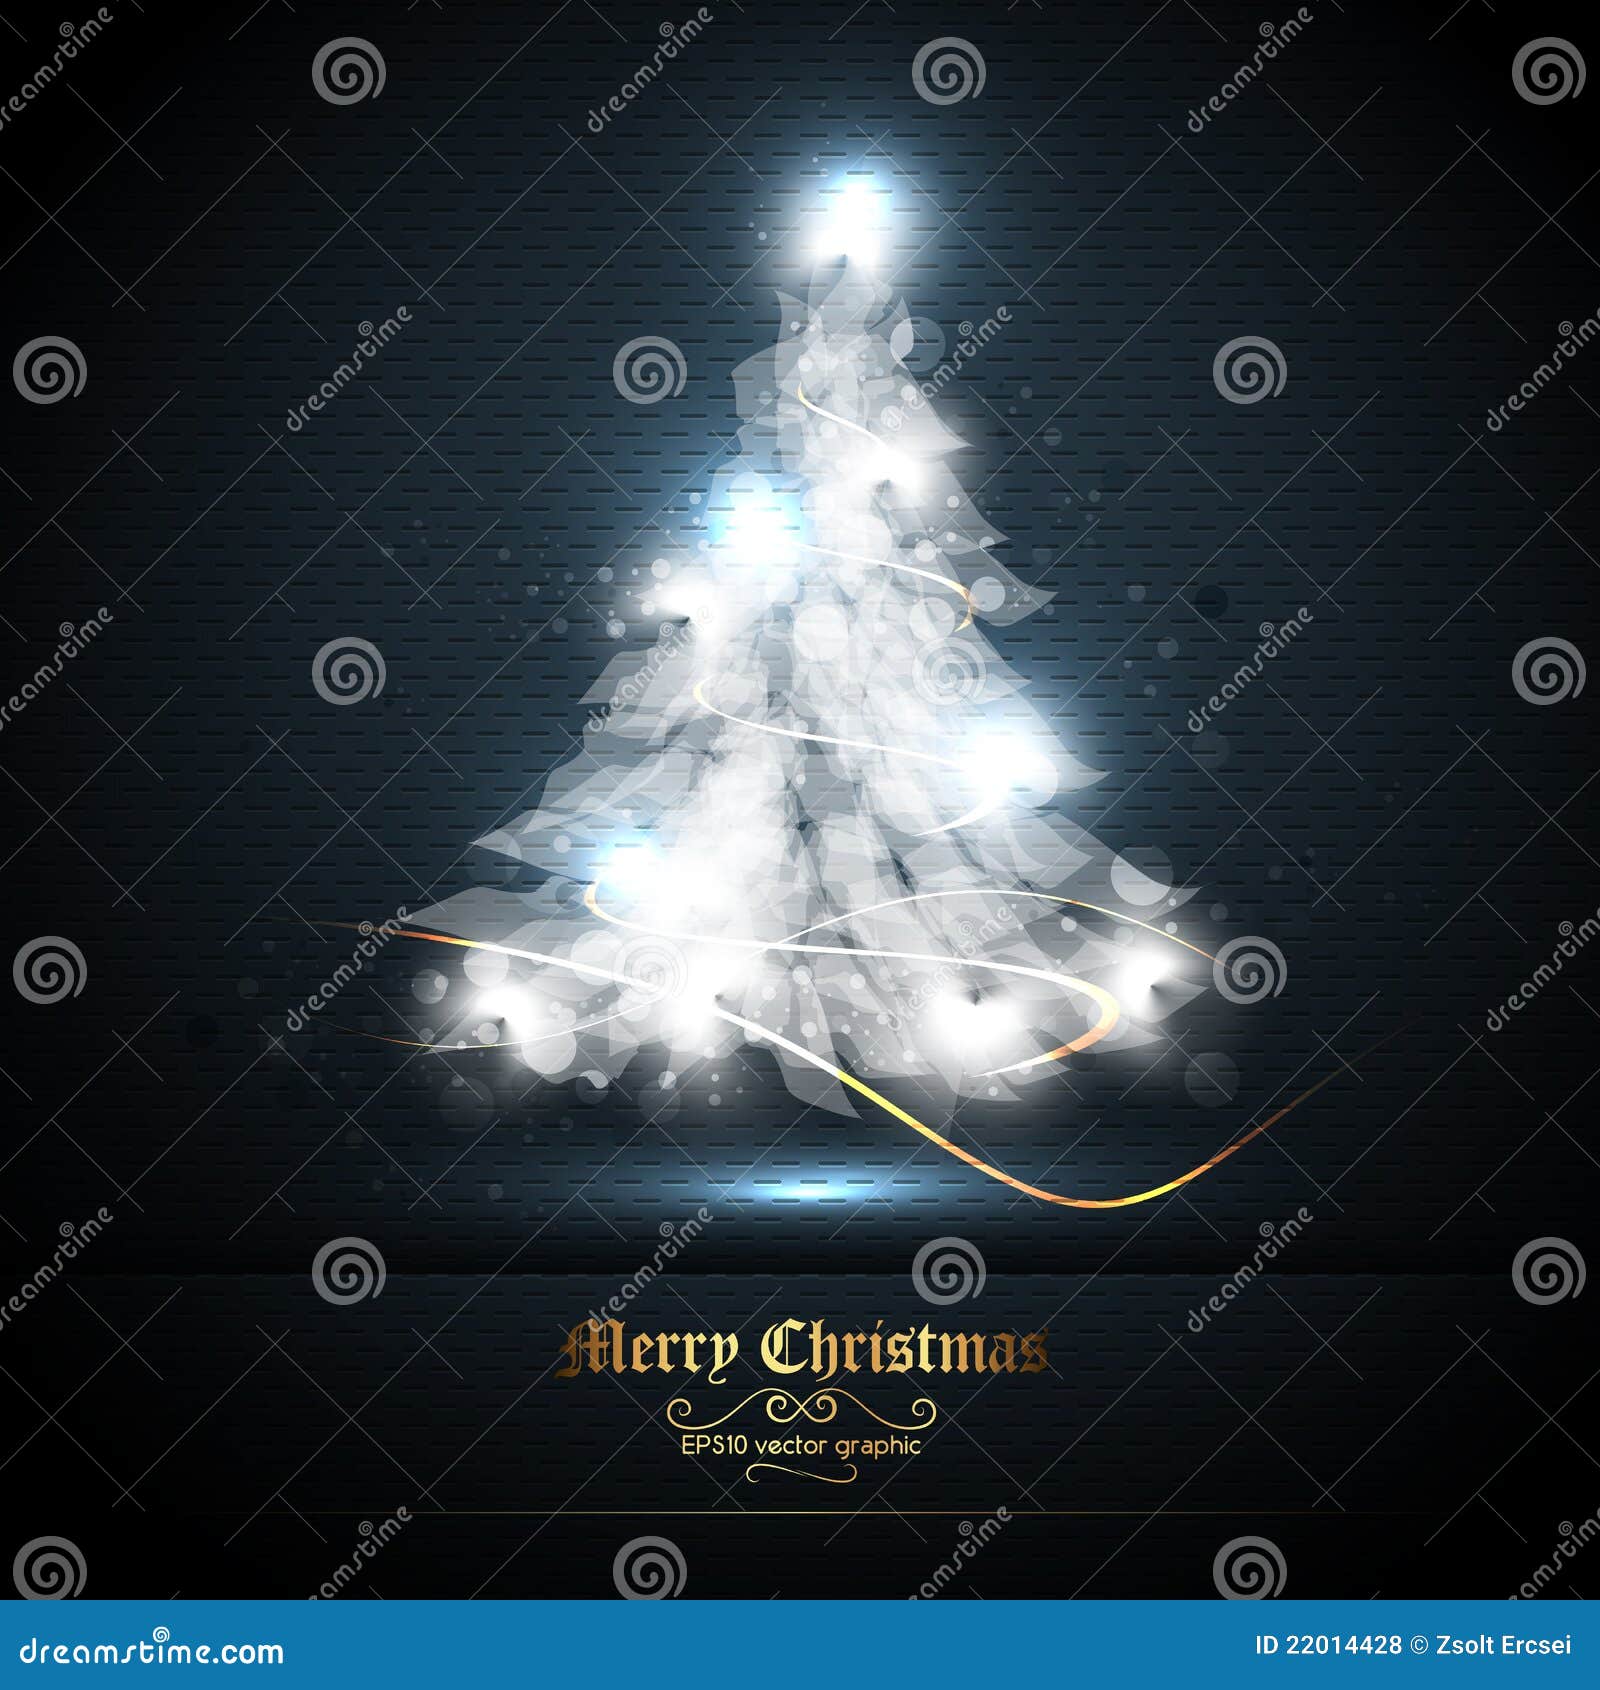 christmas greeting card with tree of lights